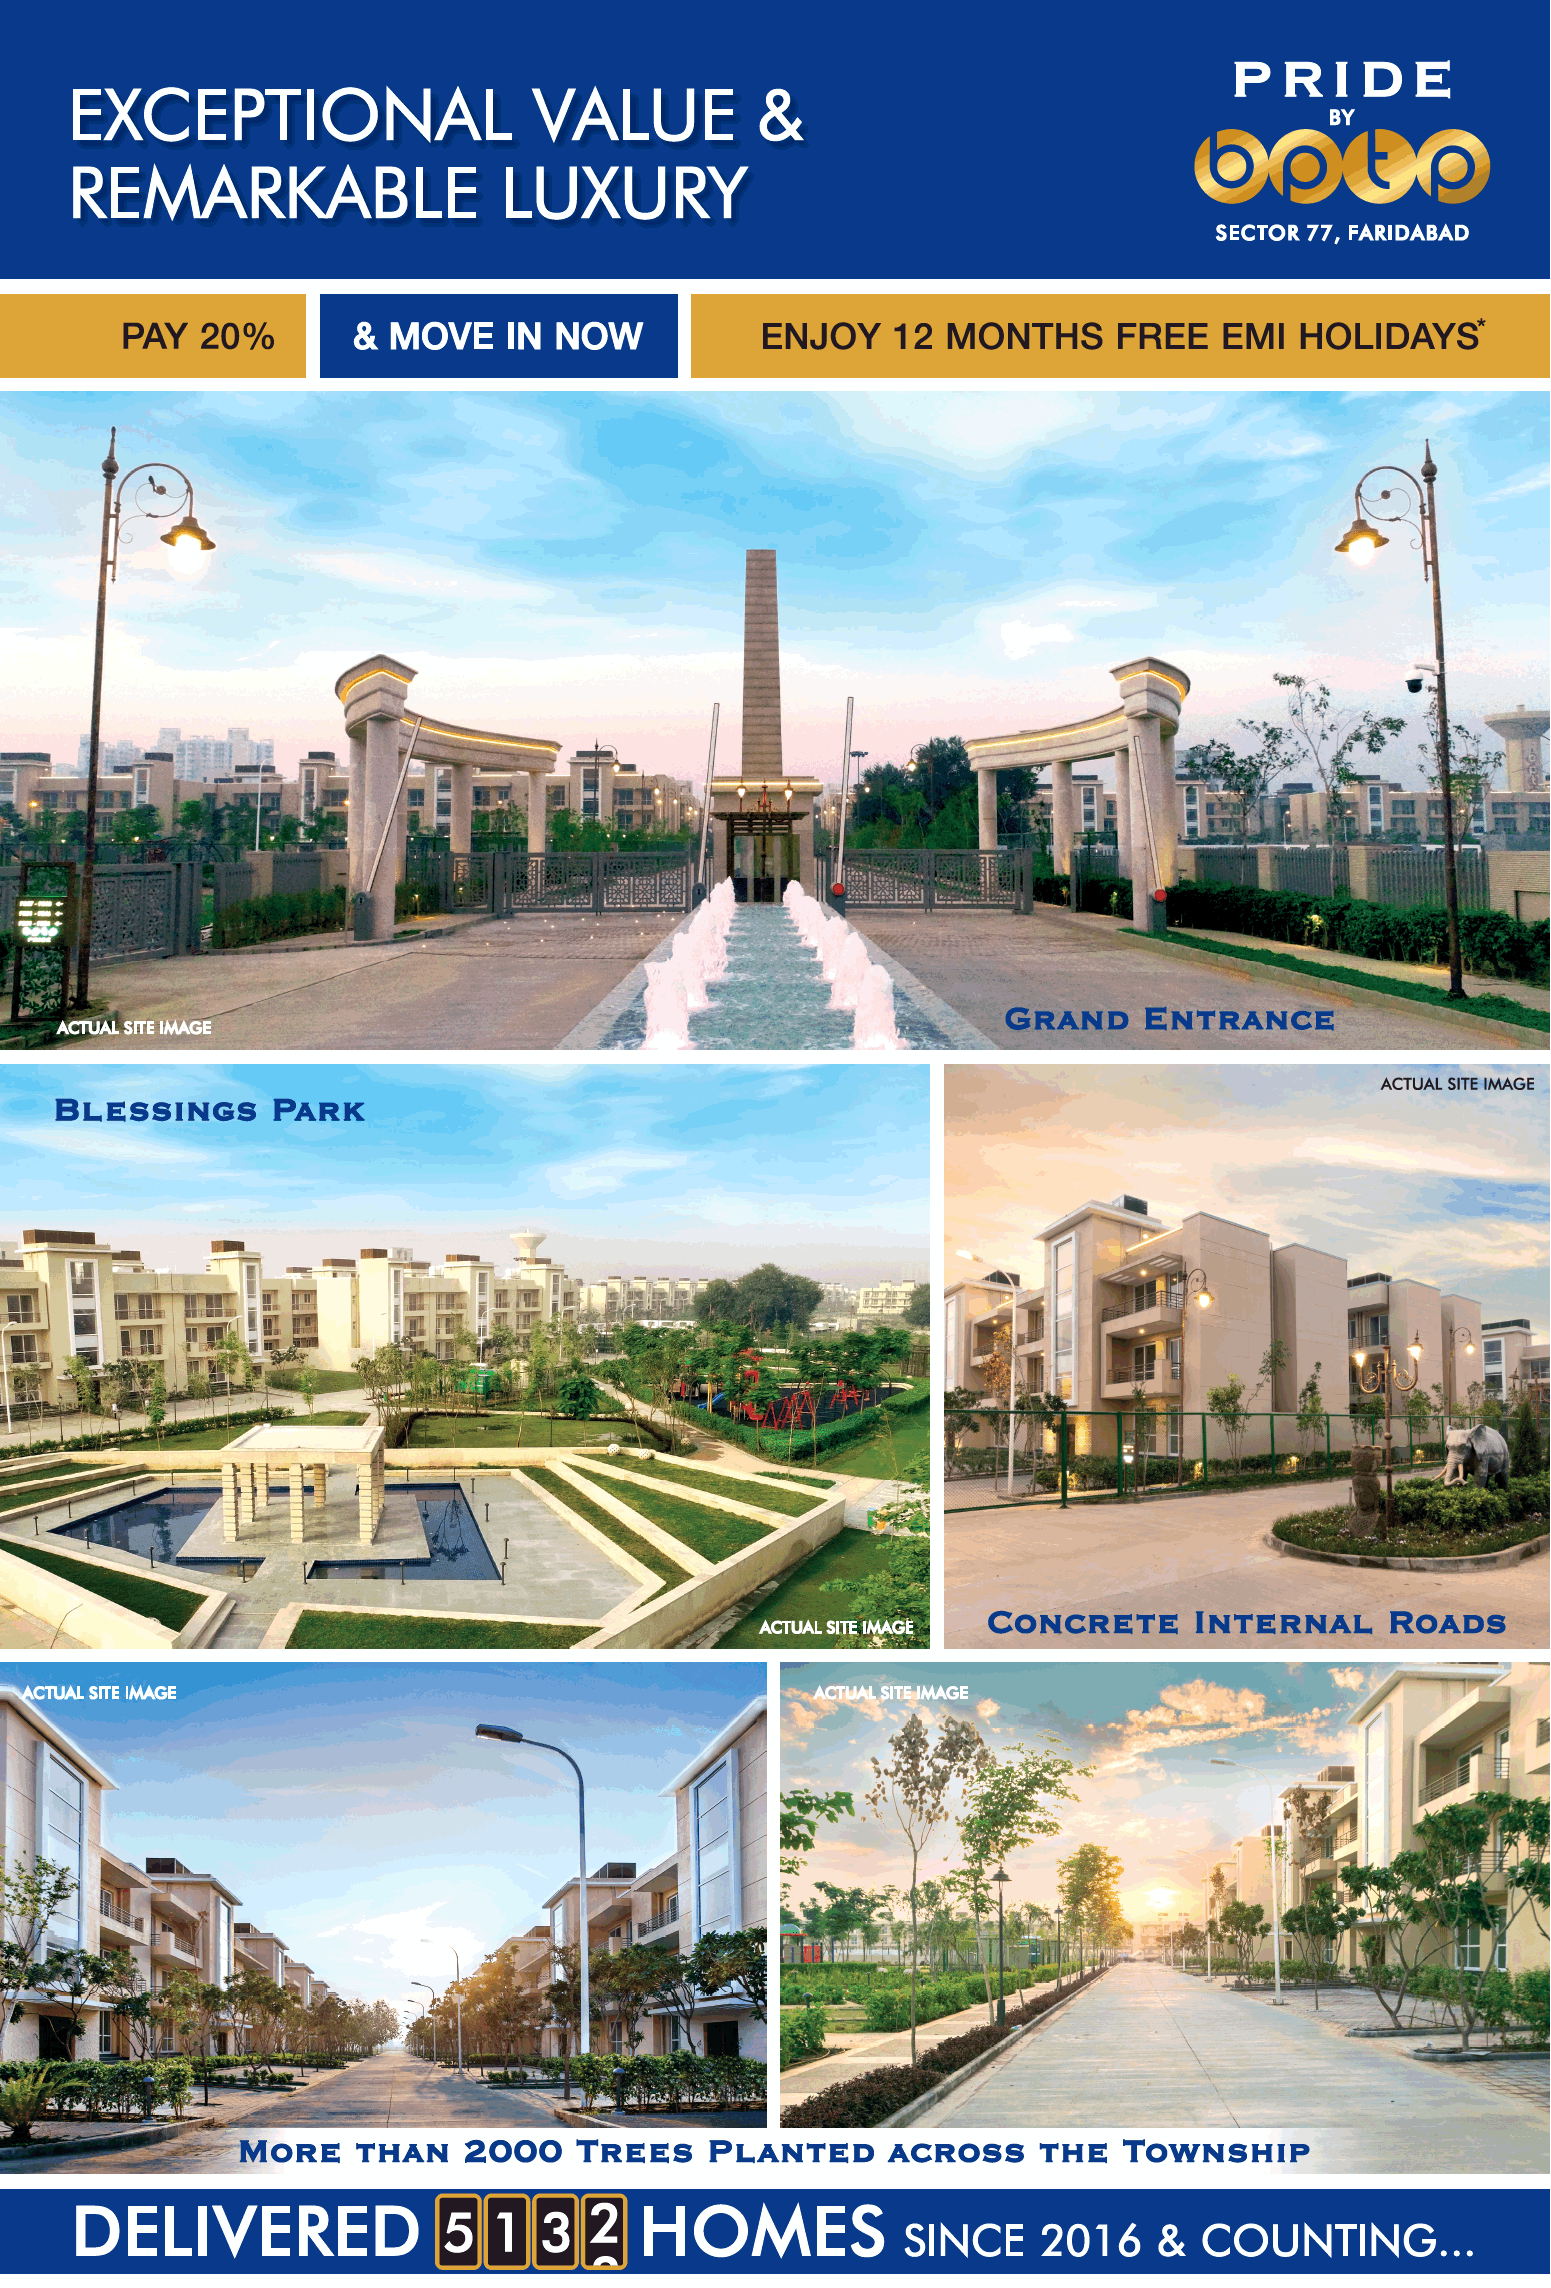 Pay 20% & move in now at BPTP Parklands Pride in Faridabad Update